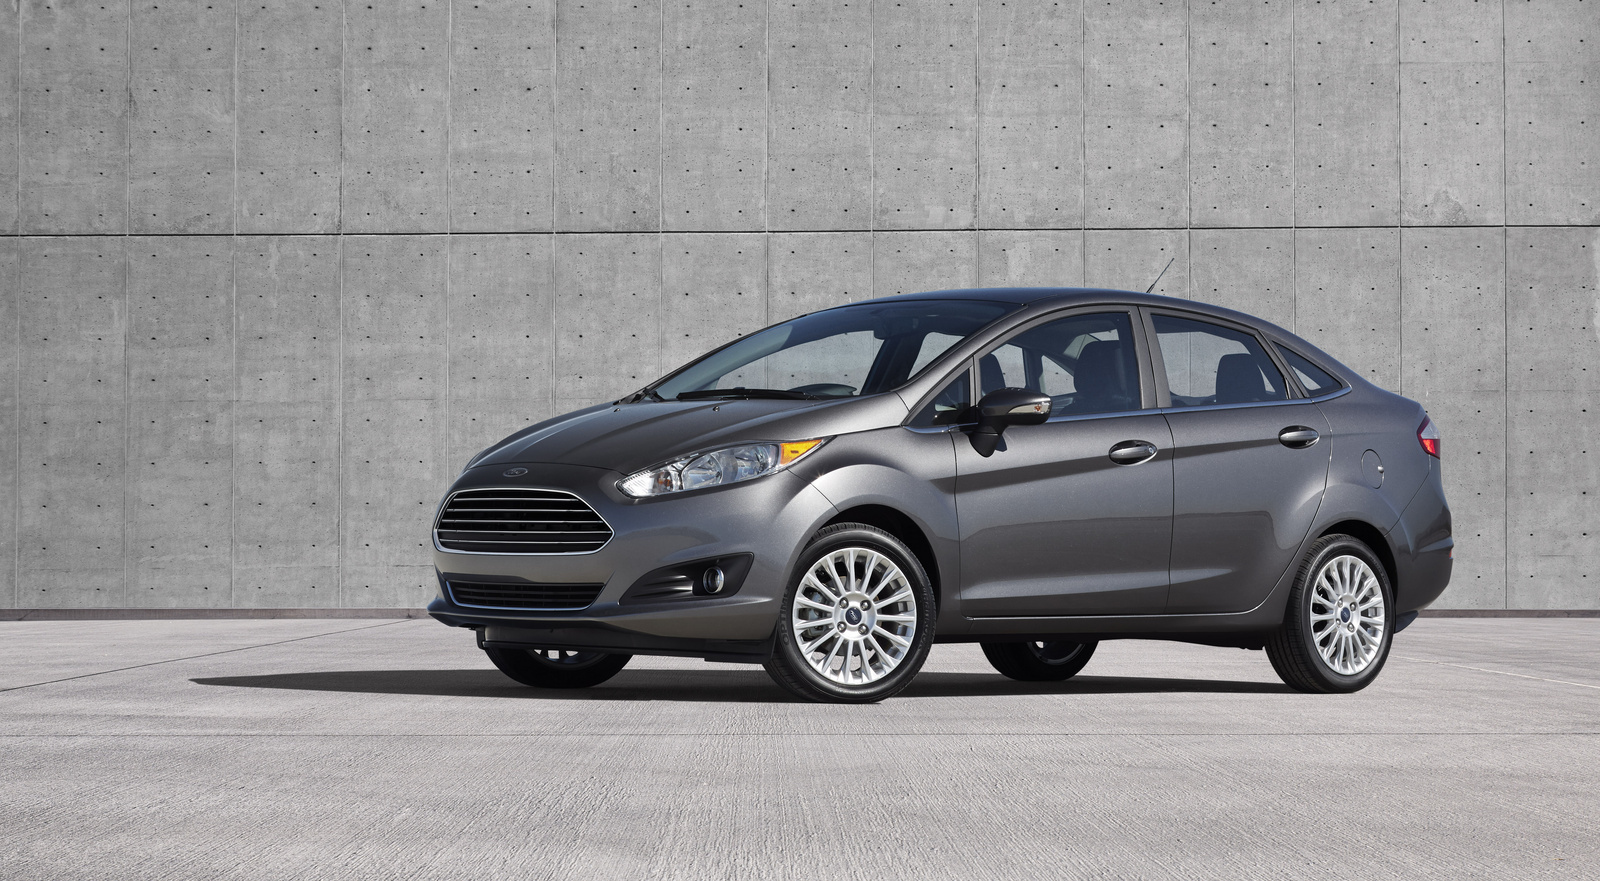 2014 Ford Fiesta: Prices, Reviews & Pictures - CarGurus